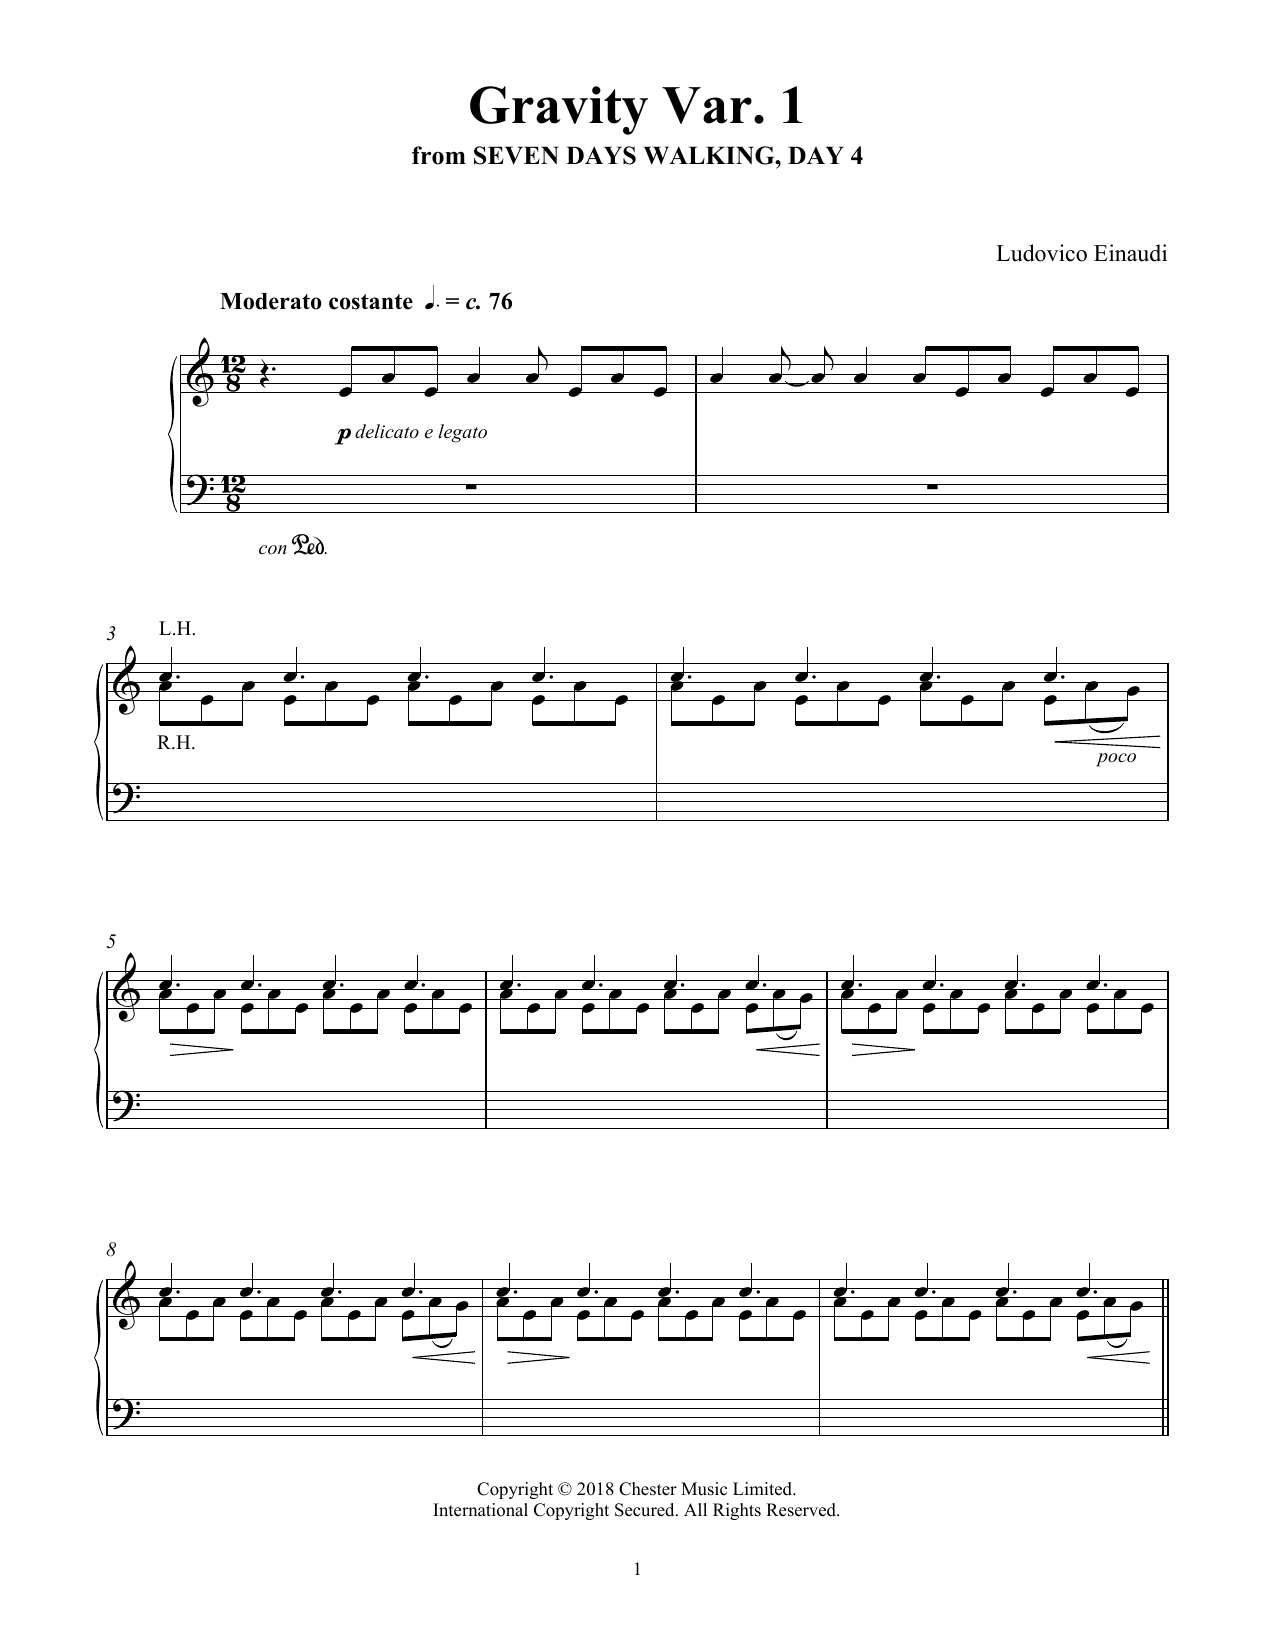 Gravity Var. 1 (from Seven Days Walking: Day 4) Sheet Music by Ludovico  Einaudi for Piano/Keyboard